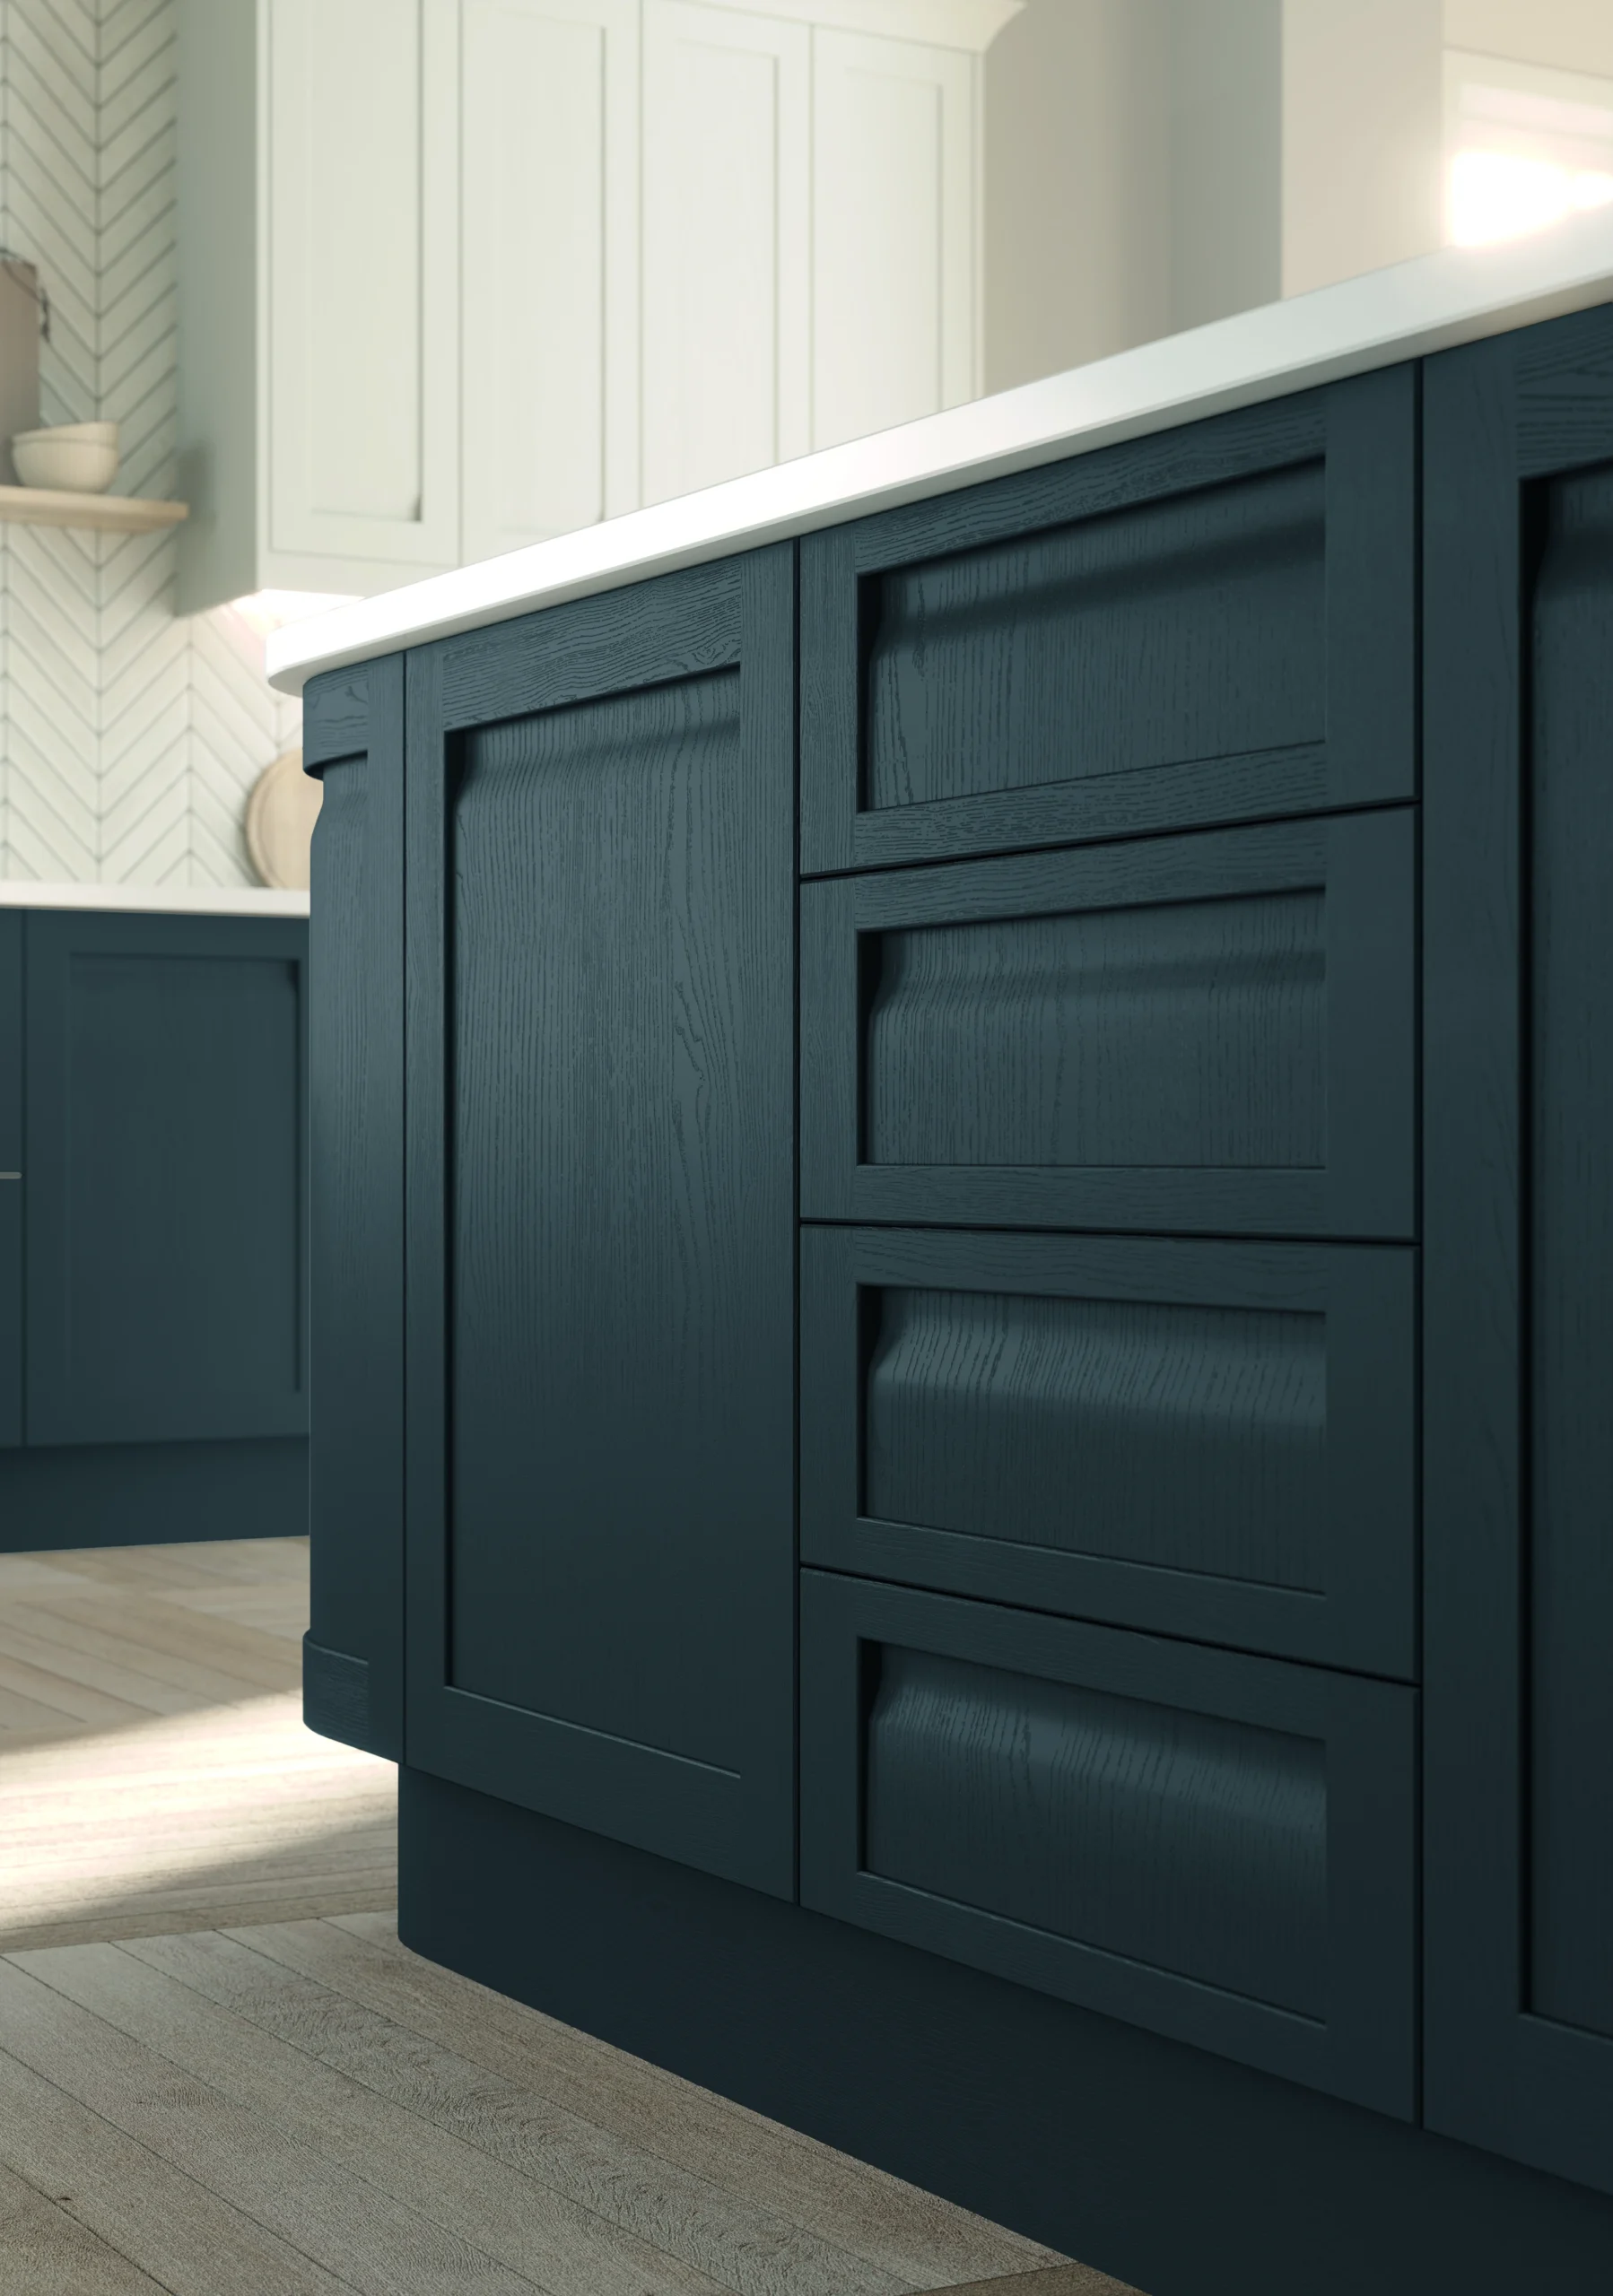 Variety of cabinet styles including filing cabinets, chest of drawers, and kitchen cupboards for organized storage.